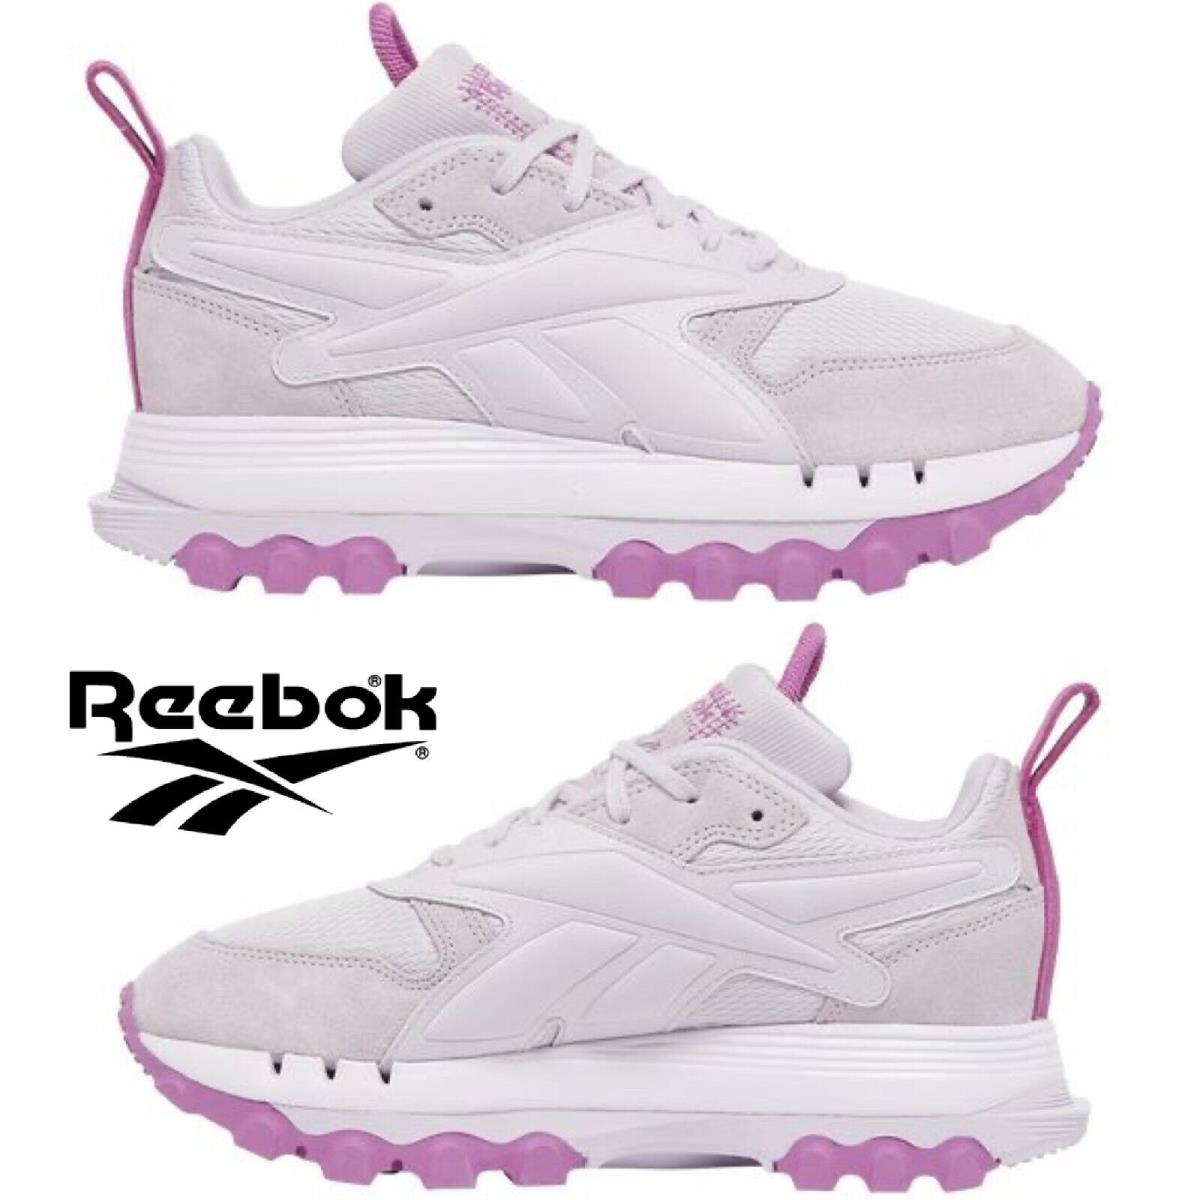 Reebok Classic Leather Cardi V2 Women`s Casual Shoes Sport Sneakers Pink